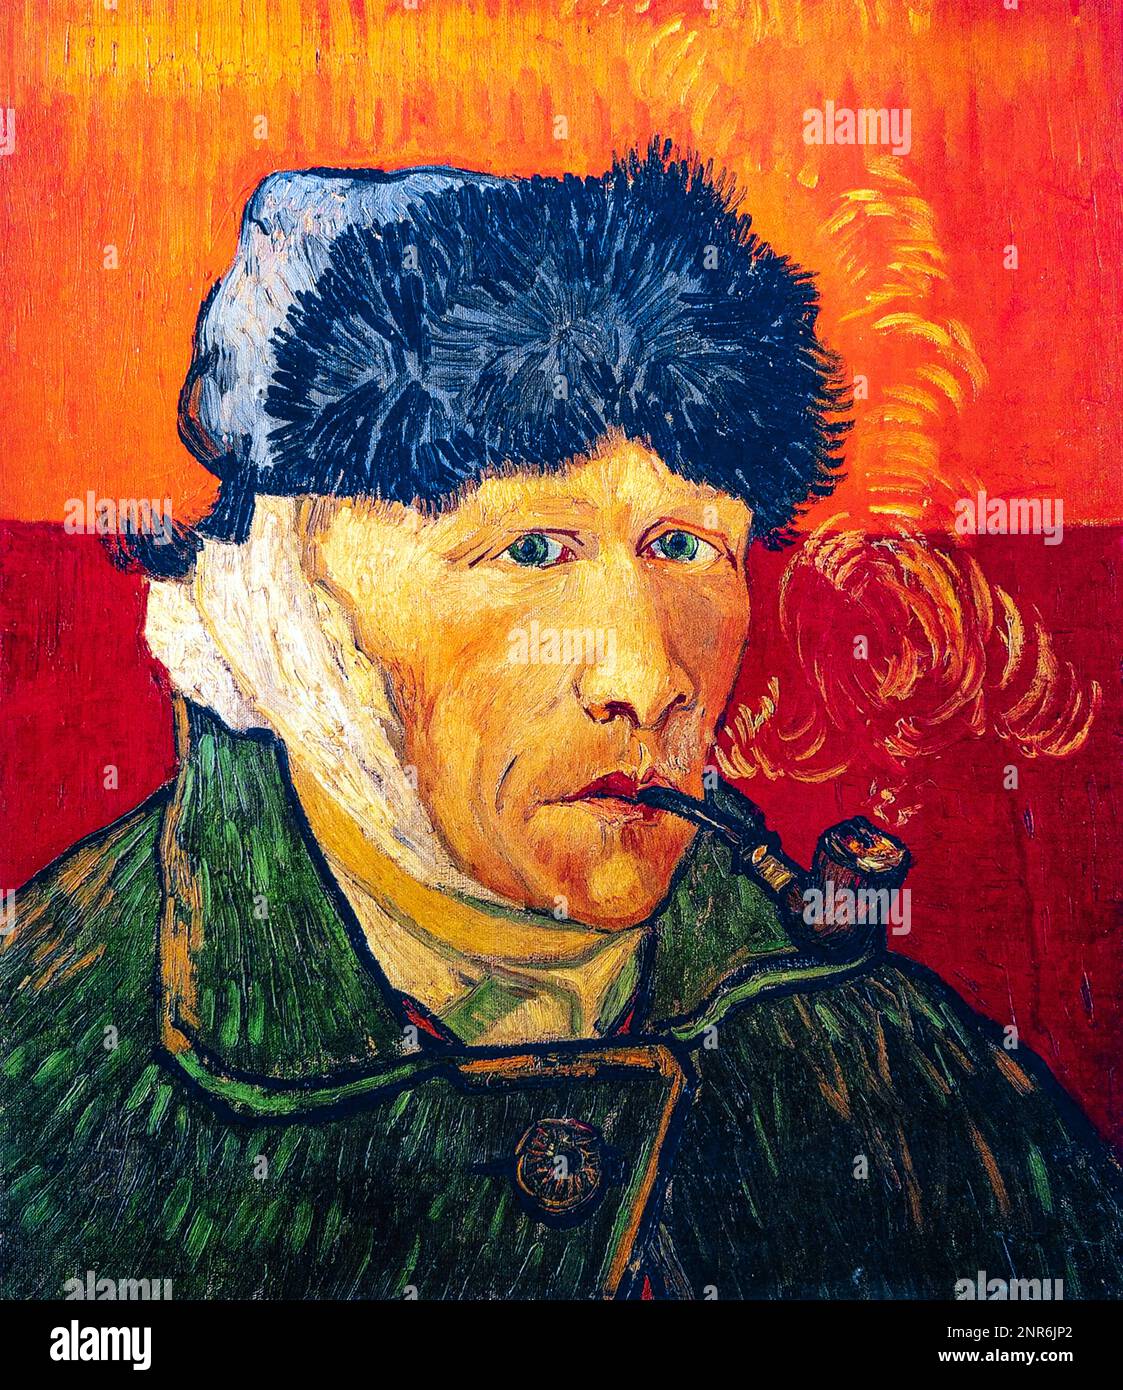 Vincent van Gogh self portrait with bandaged ear and pipe, 1889. Stock Photo